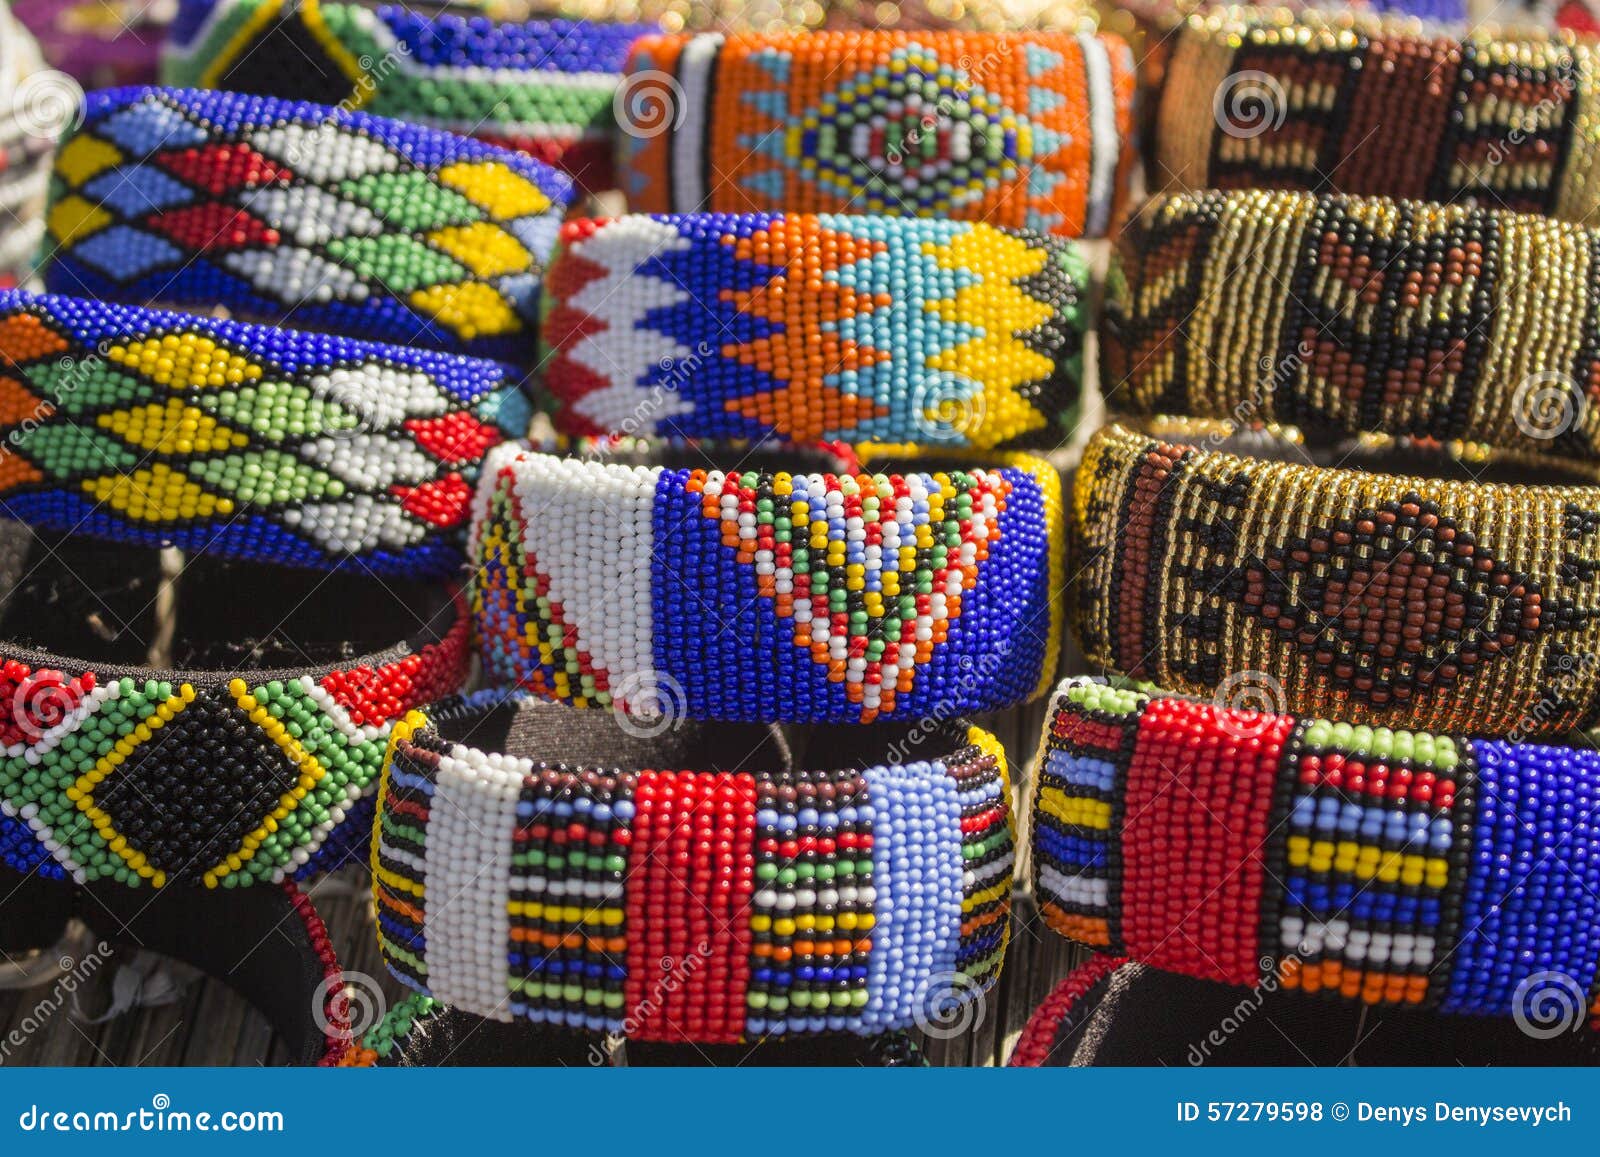 Update more than 146 african trade beads bracelet